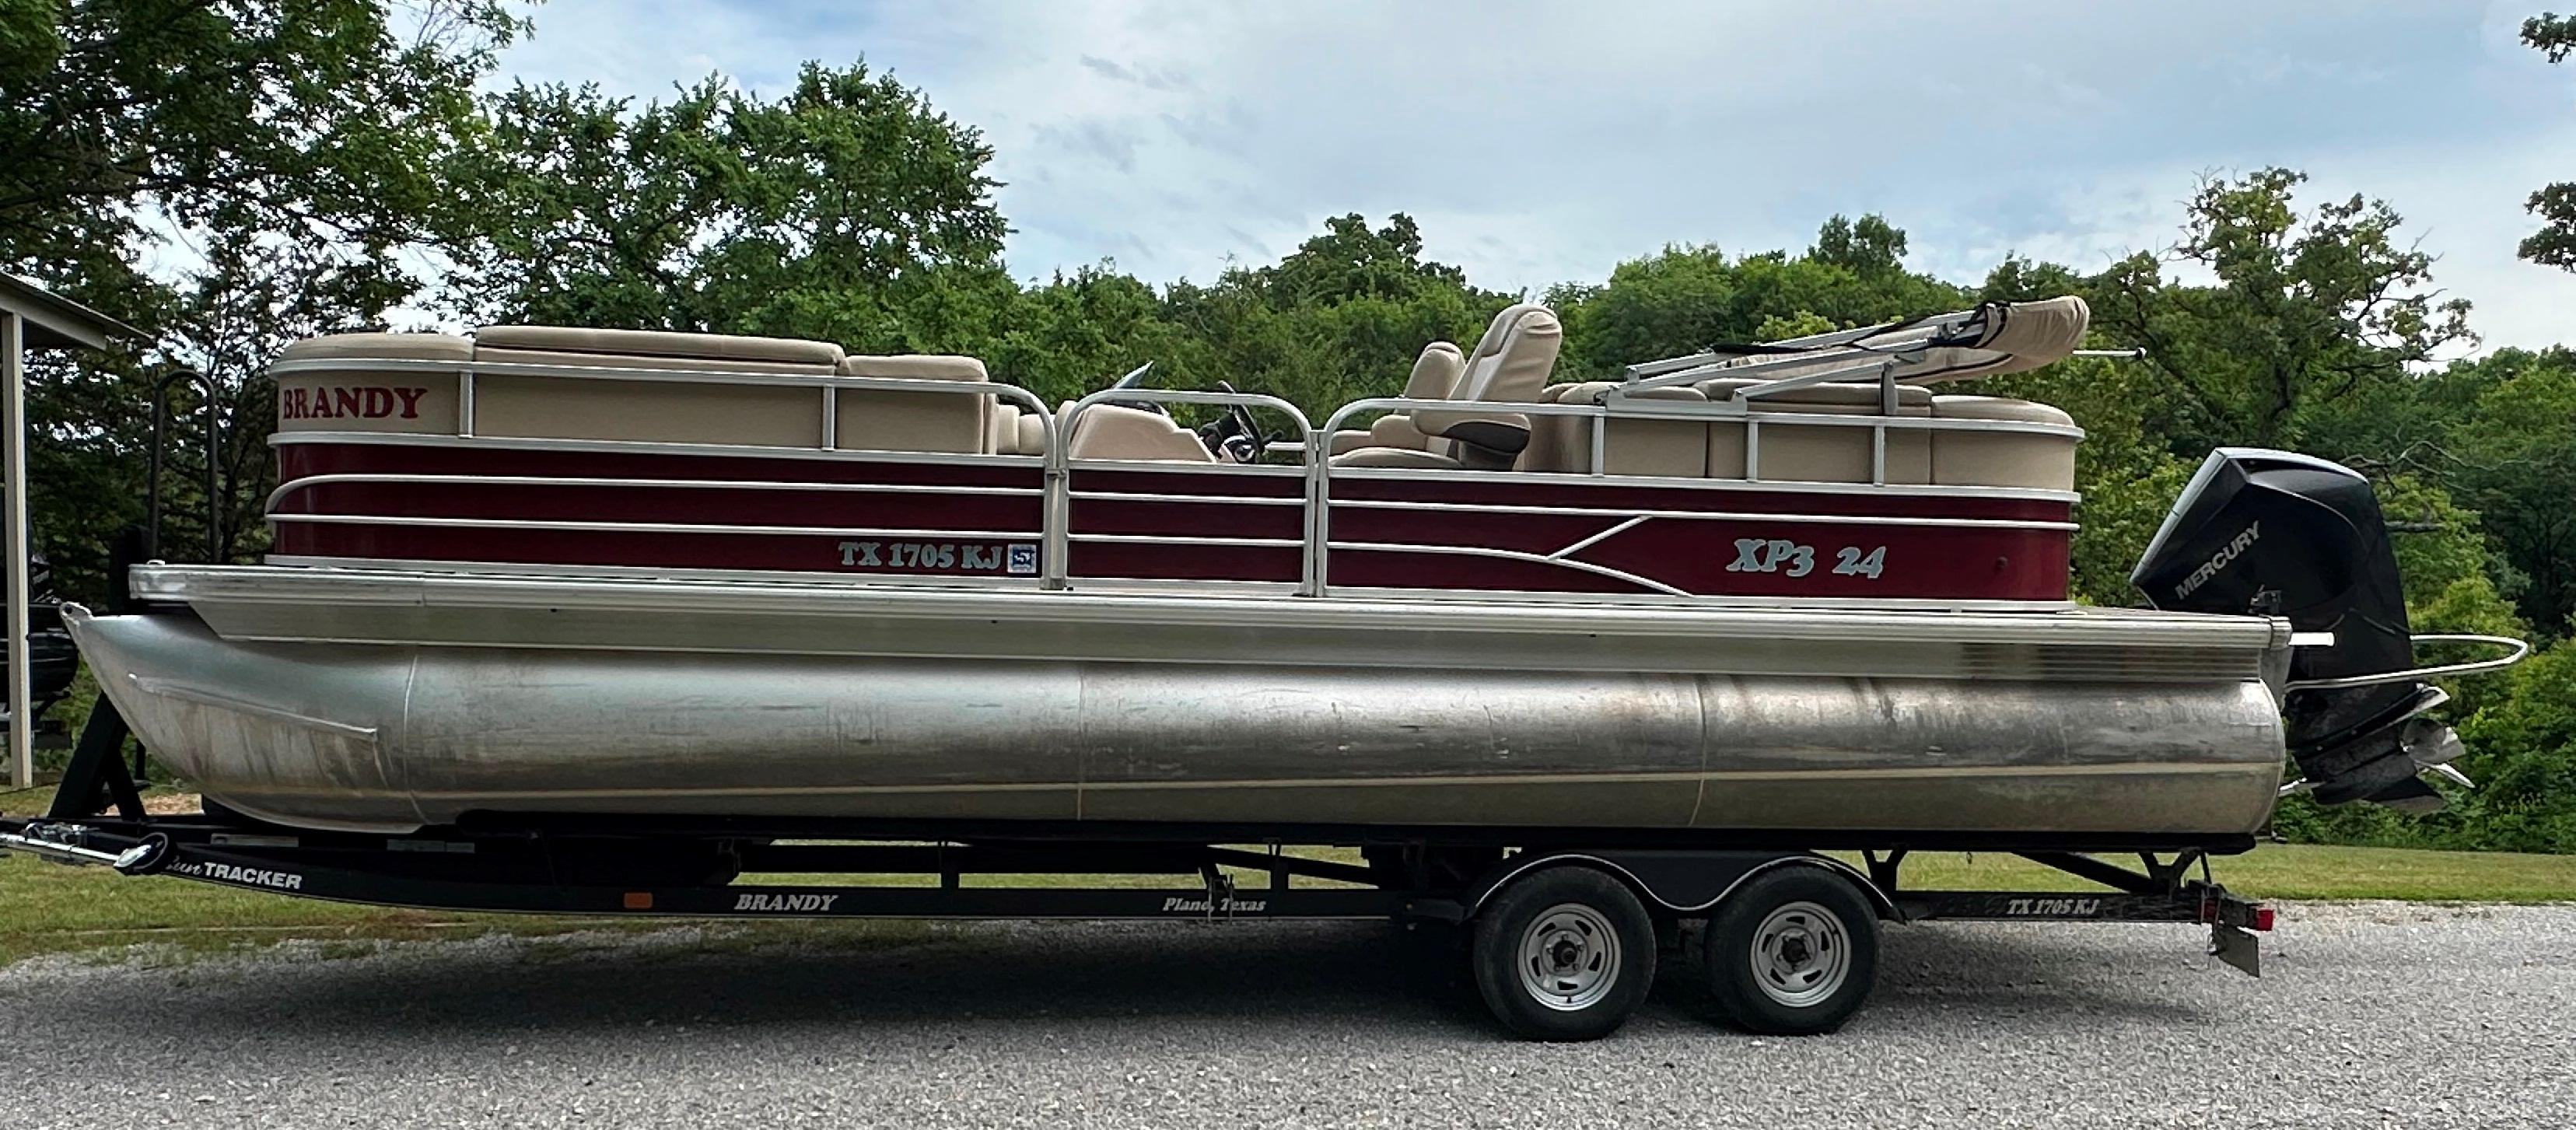 2019 Sun Tracker Party Barge 24 XP3